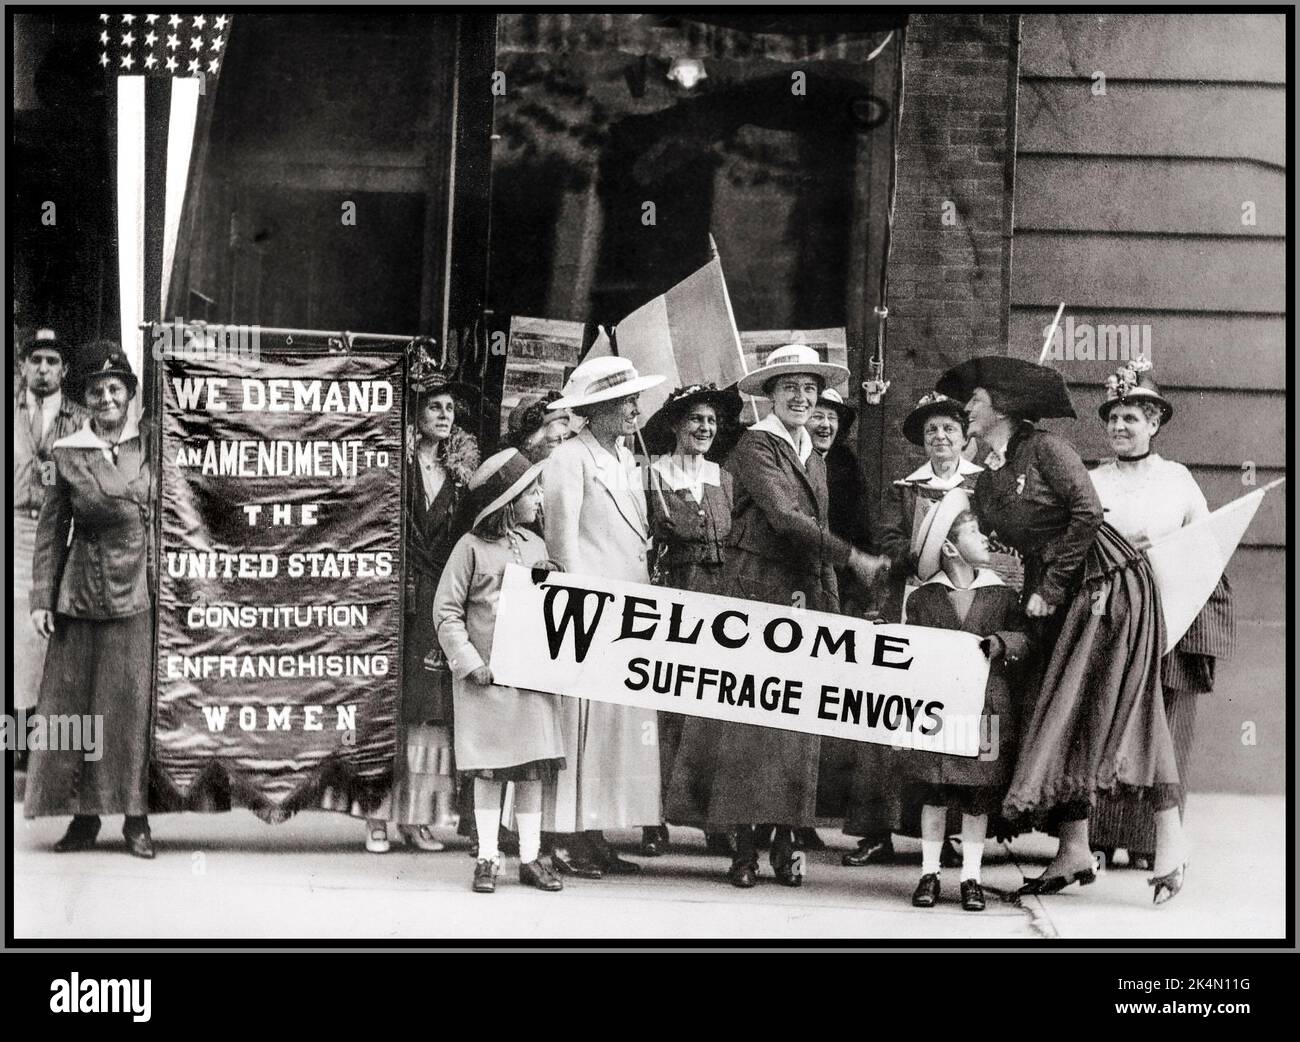 Suffrage USA 19th amendment America Constitution. Women on an American street with banners ‘ WE DEMAND AMENDMENT’ fighting as Suffragettes for the right to vote in the USA. Stock Photo